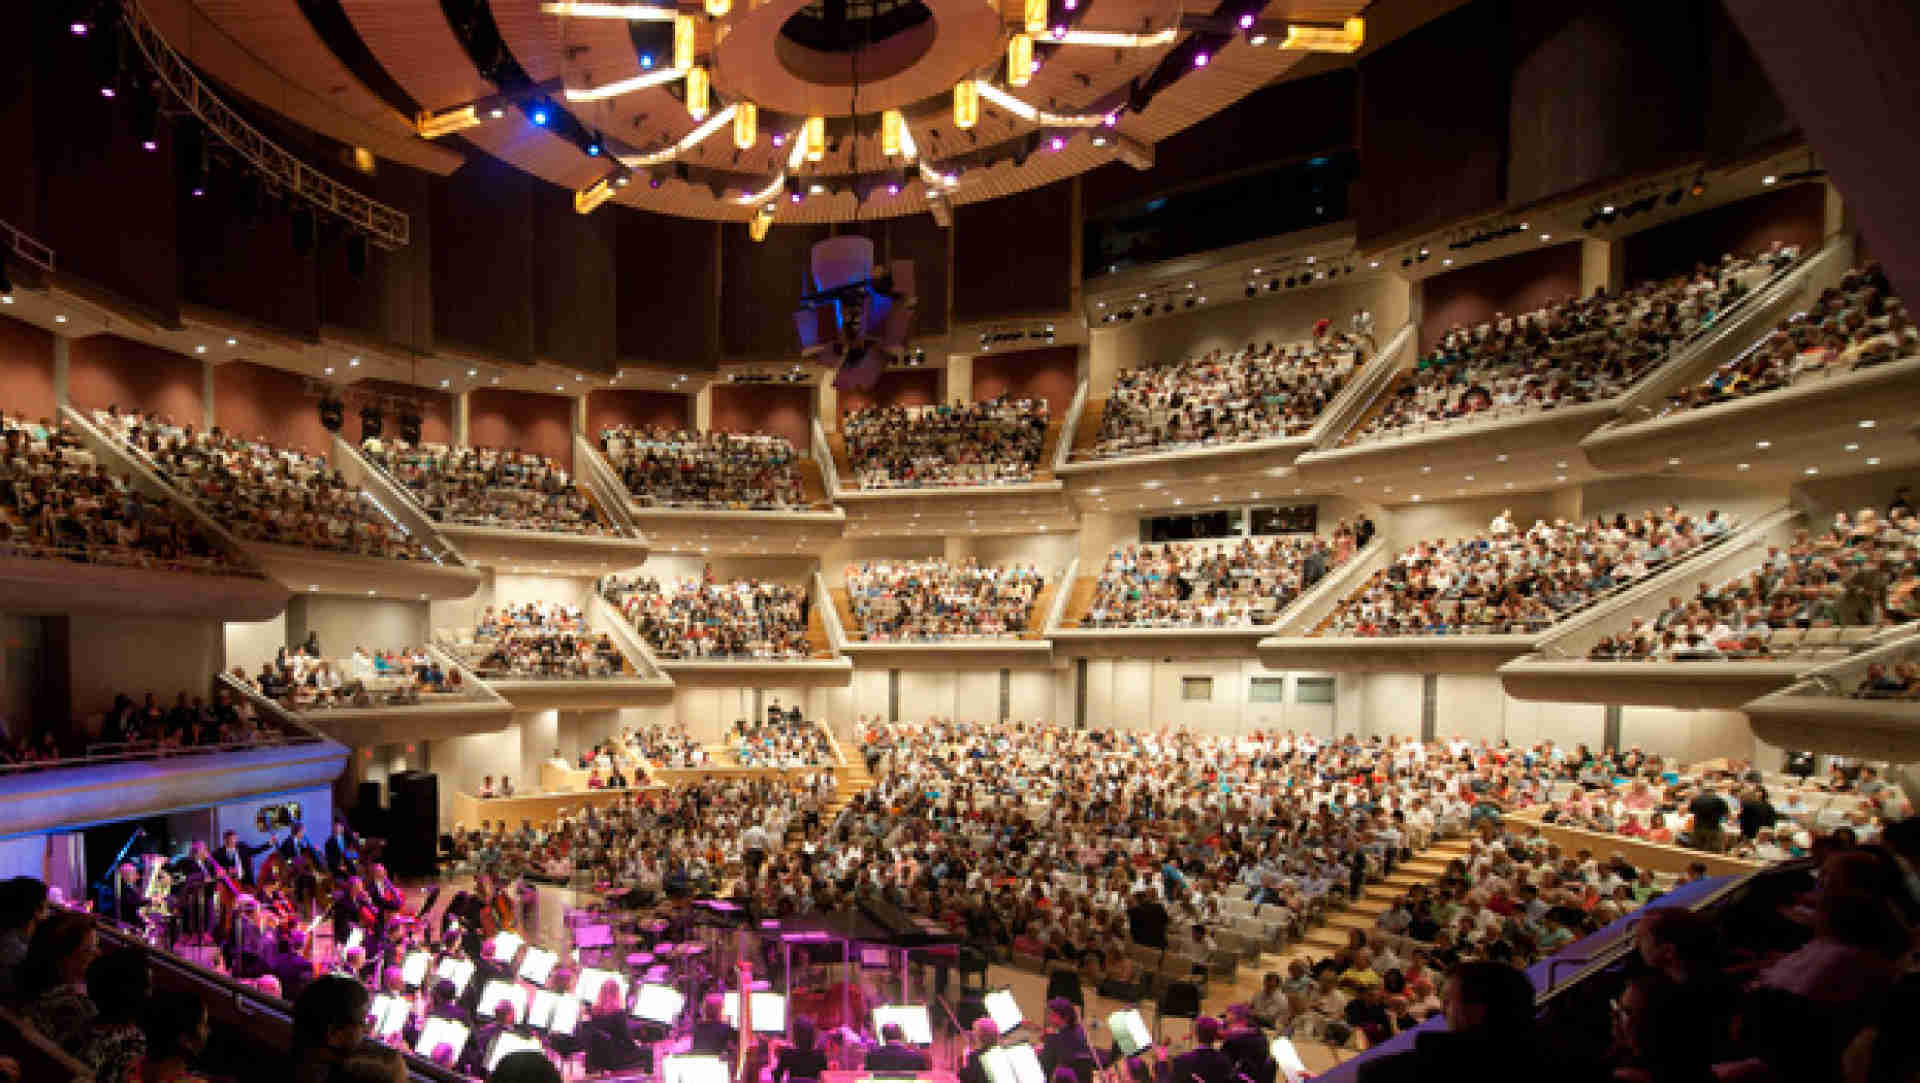 A New Sound System for Roy Thomson Hall - roy-thomson-hall-featured